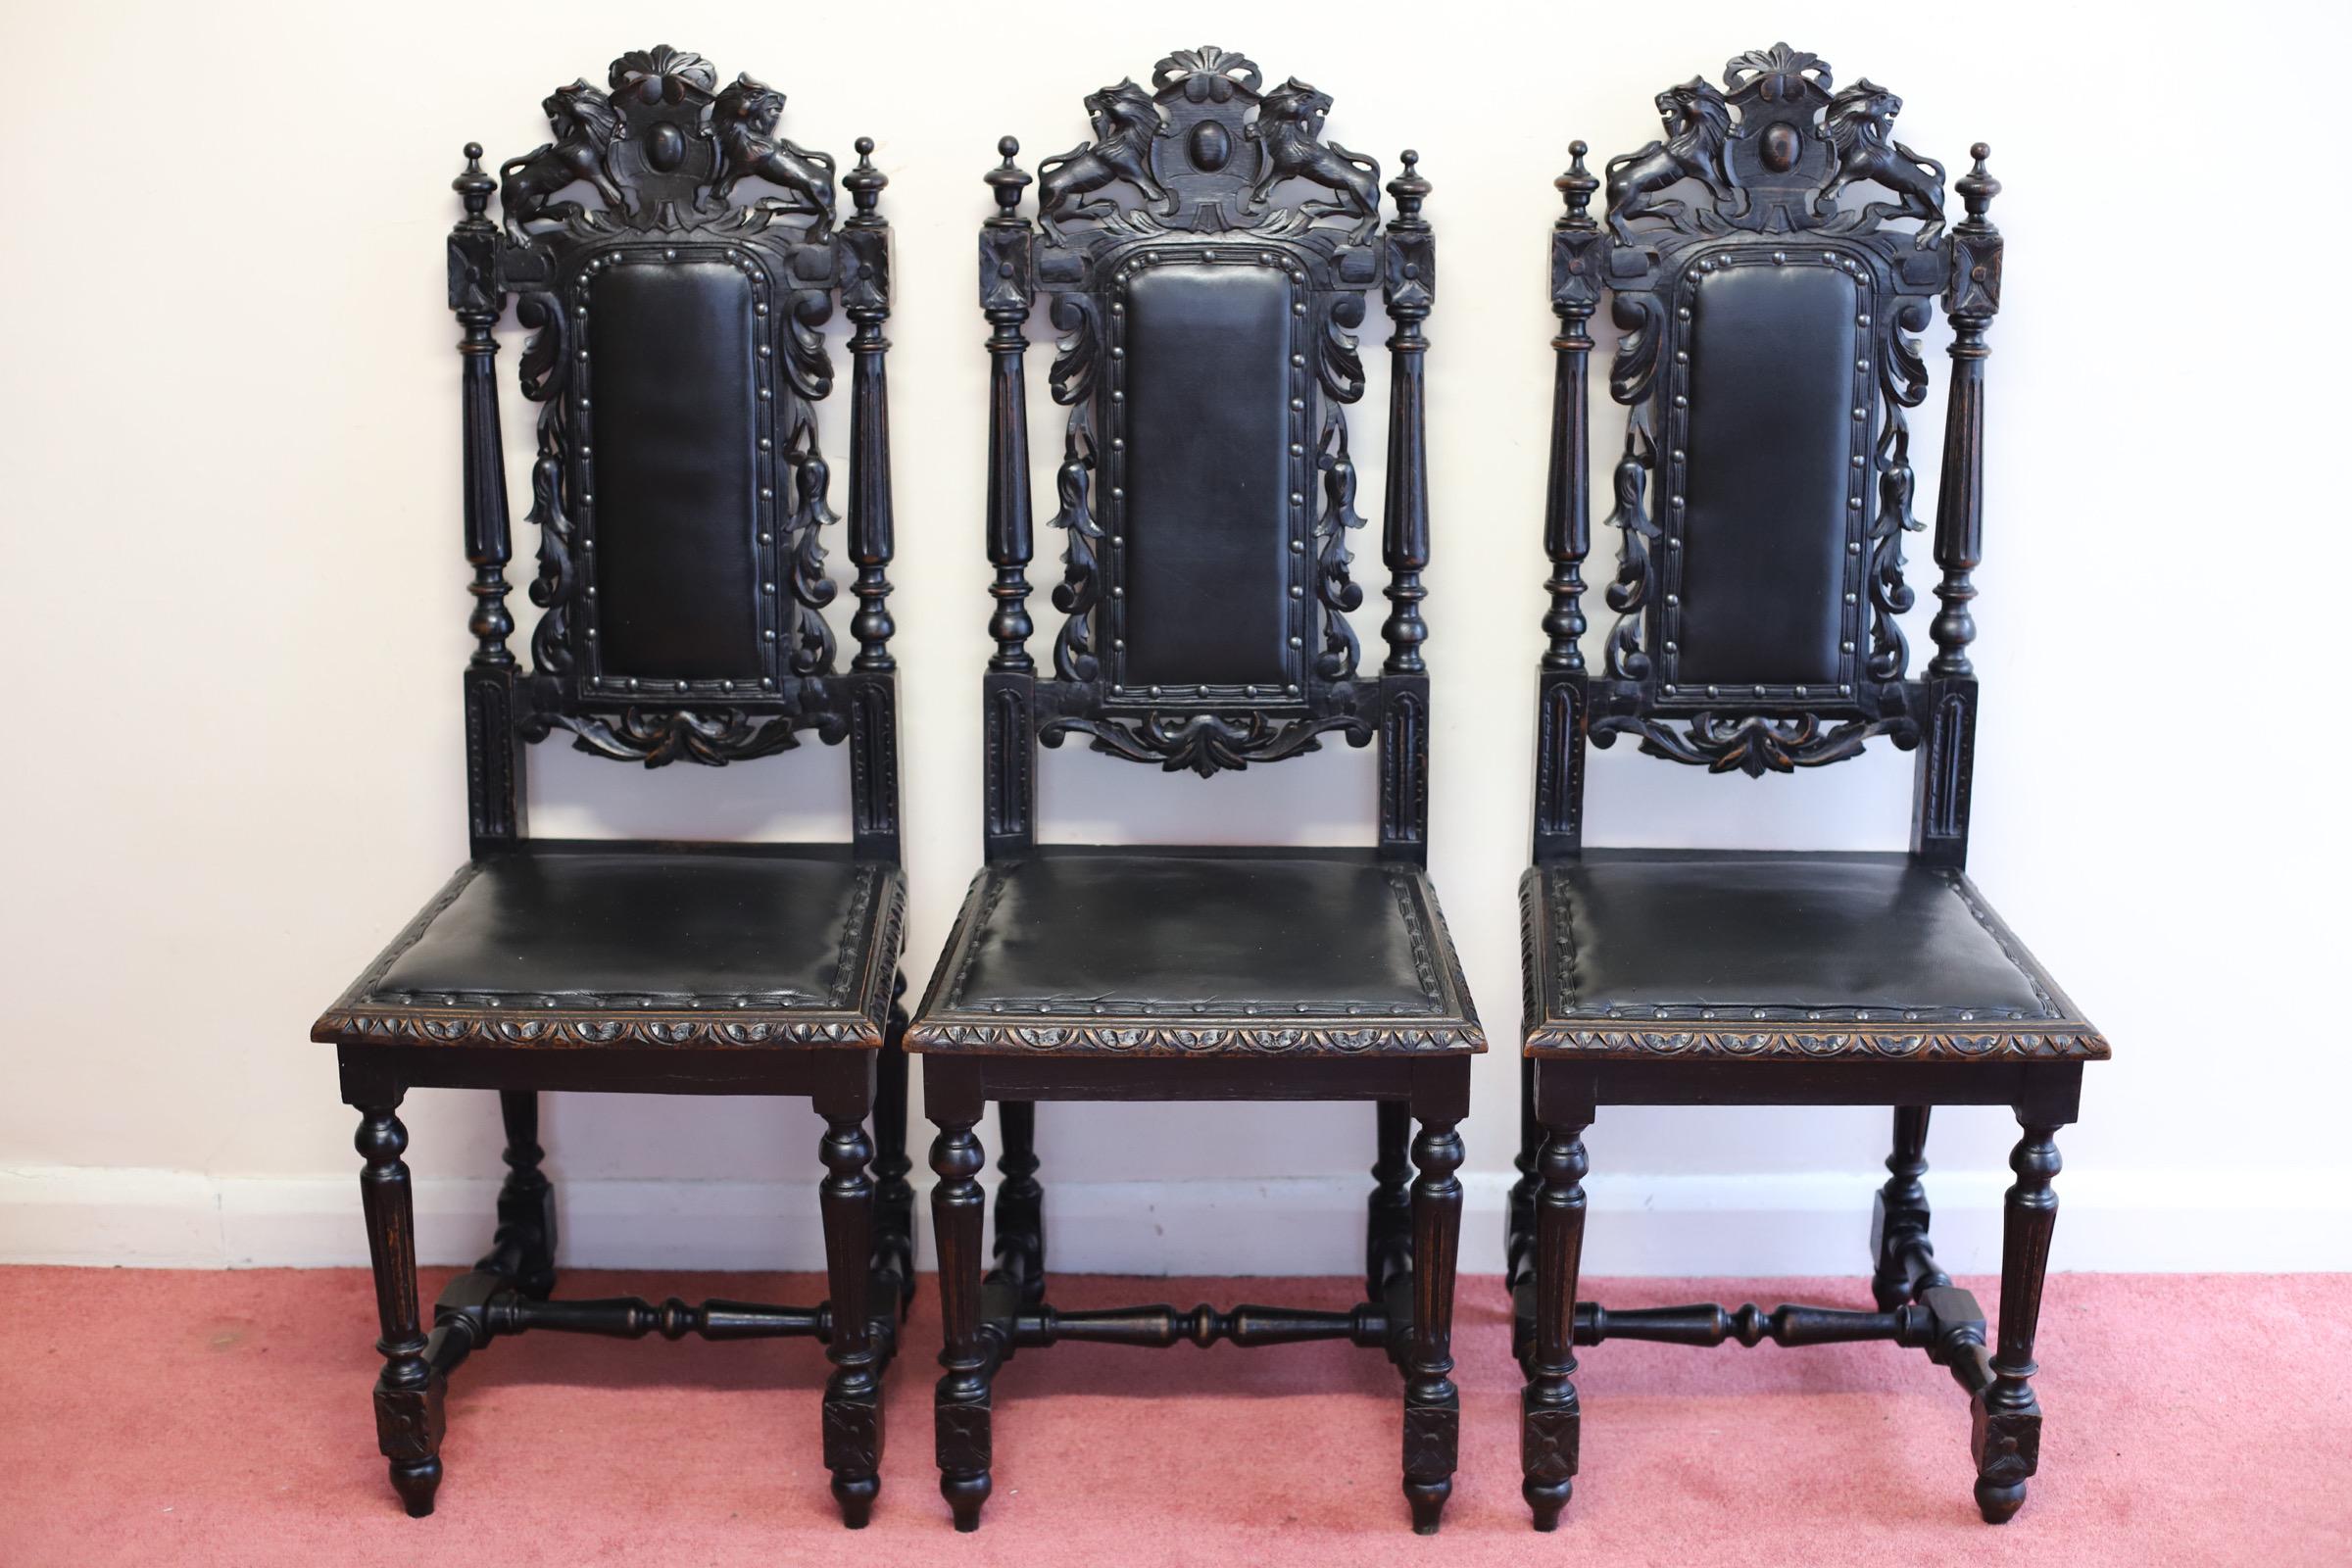 Set of six Hand- Carved Lion Terminal Victorian Dining Chairs.
We are delighted to offer for sale this stunning set of six early Victorian hand-carved oak dining chairs made in the Jacobean manor.
A set of six early Victorian dark oak black painted